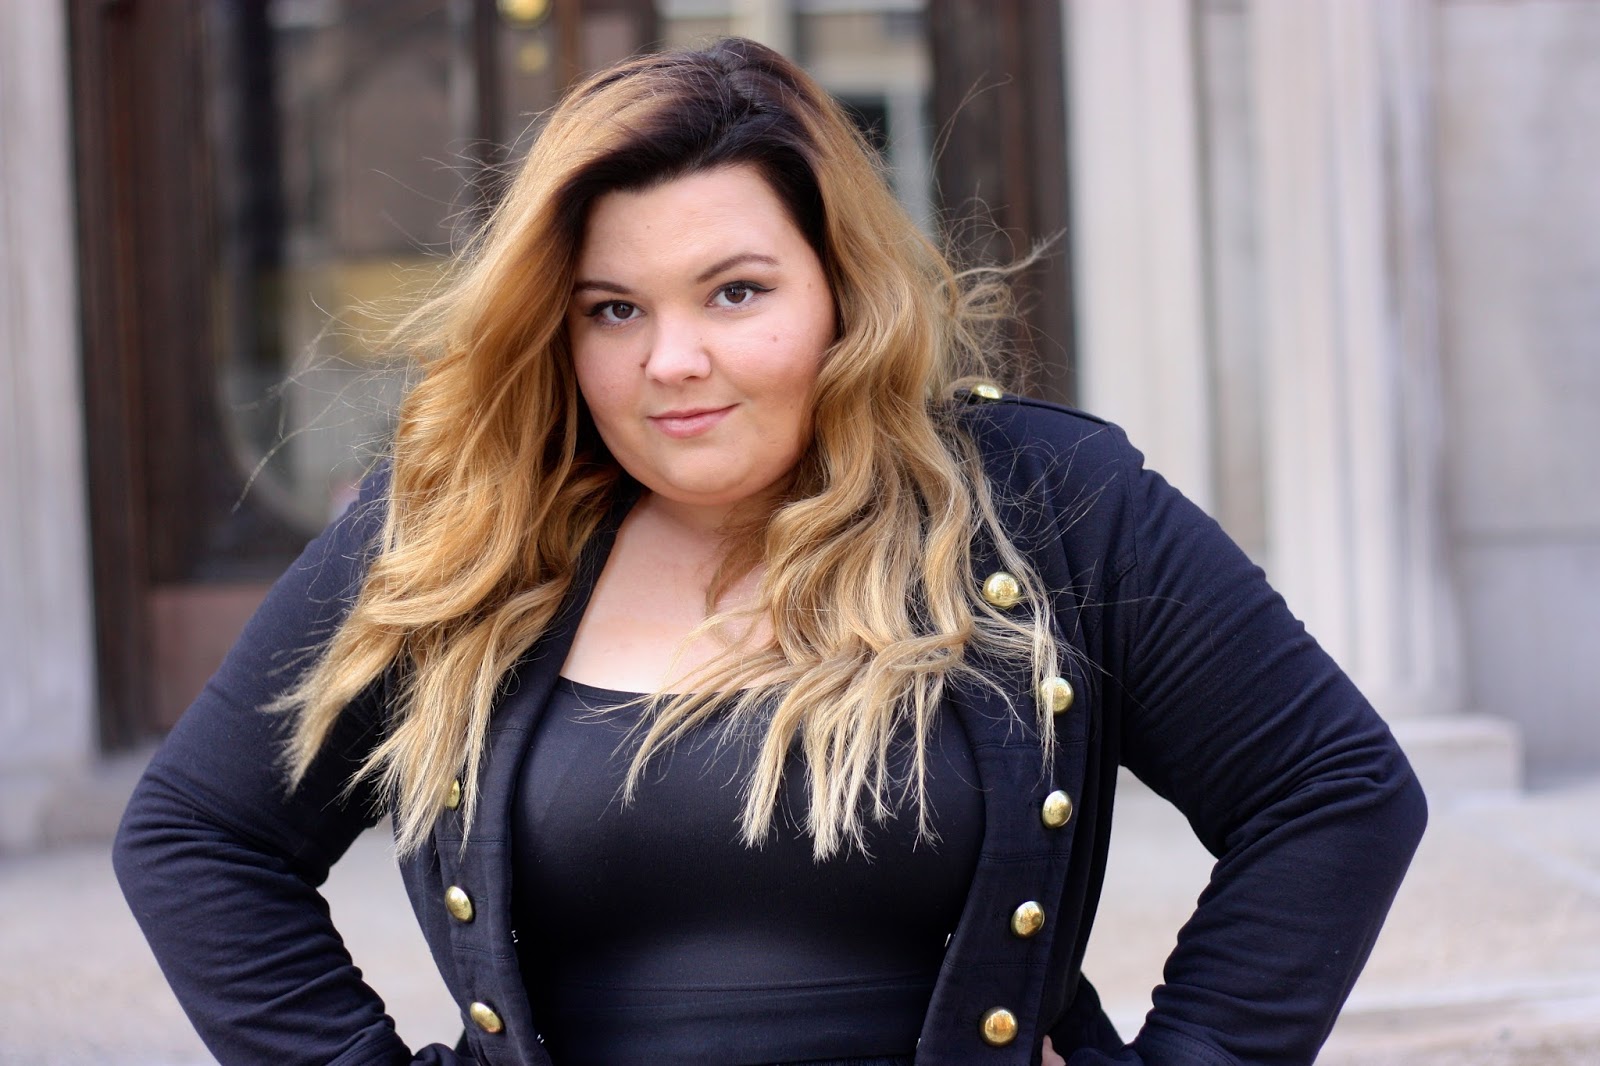 natalie in the city, natalie criag, plus size fashion, plus size fashion blogger, plus size see through maxi skirts, military jackets, gold button jackets, ootd, chicago, forever 21 plus, fashion